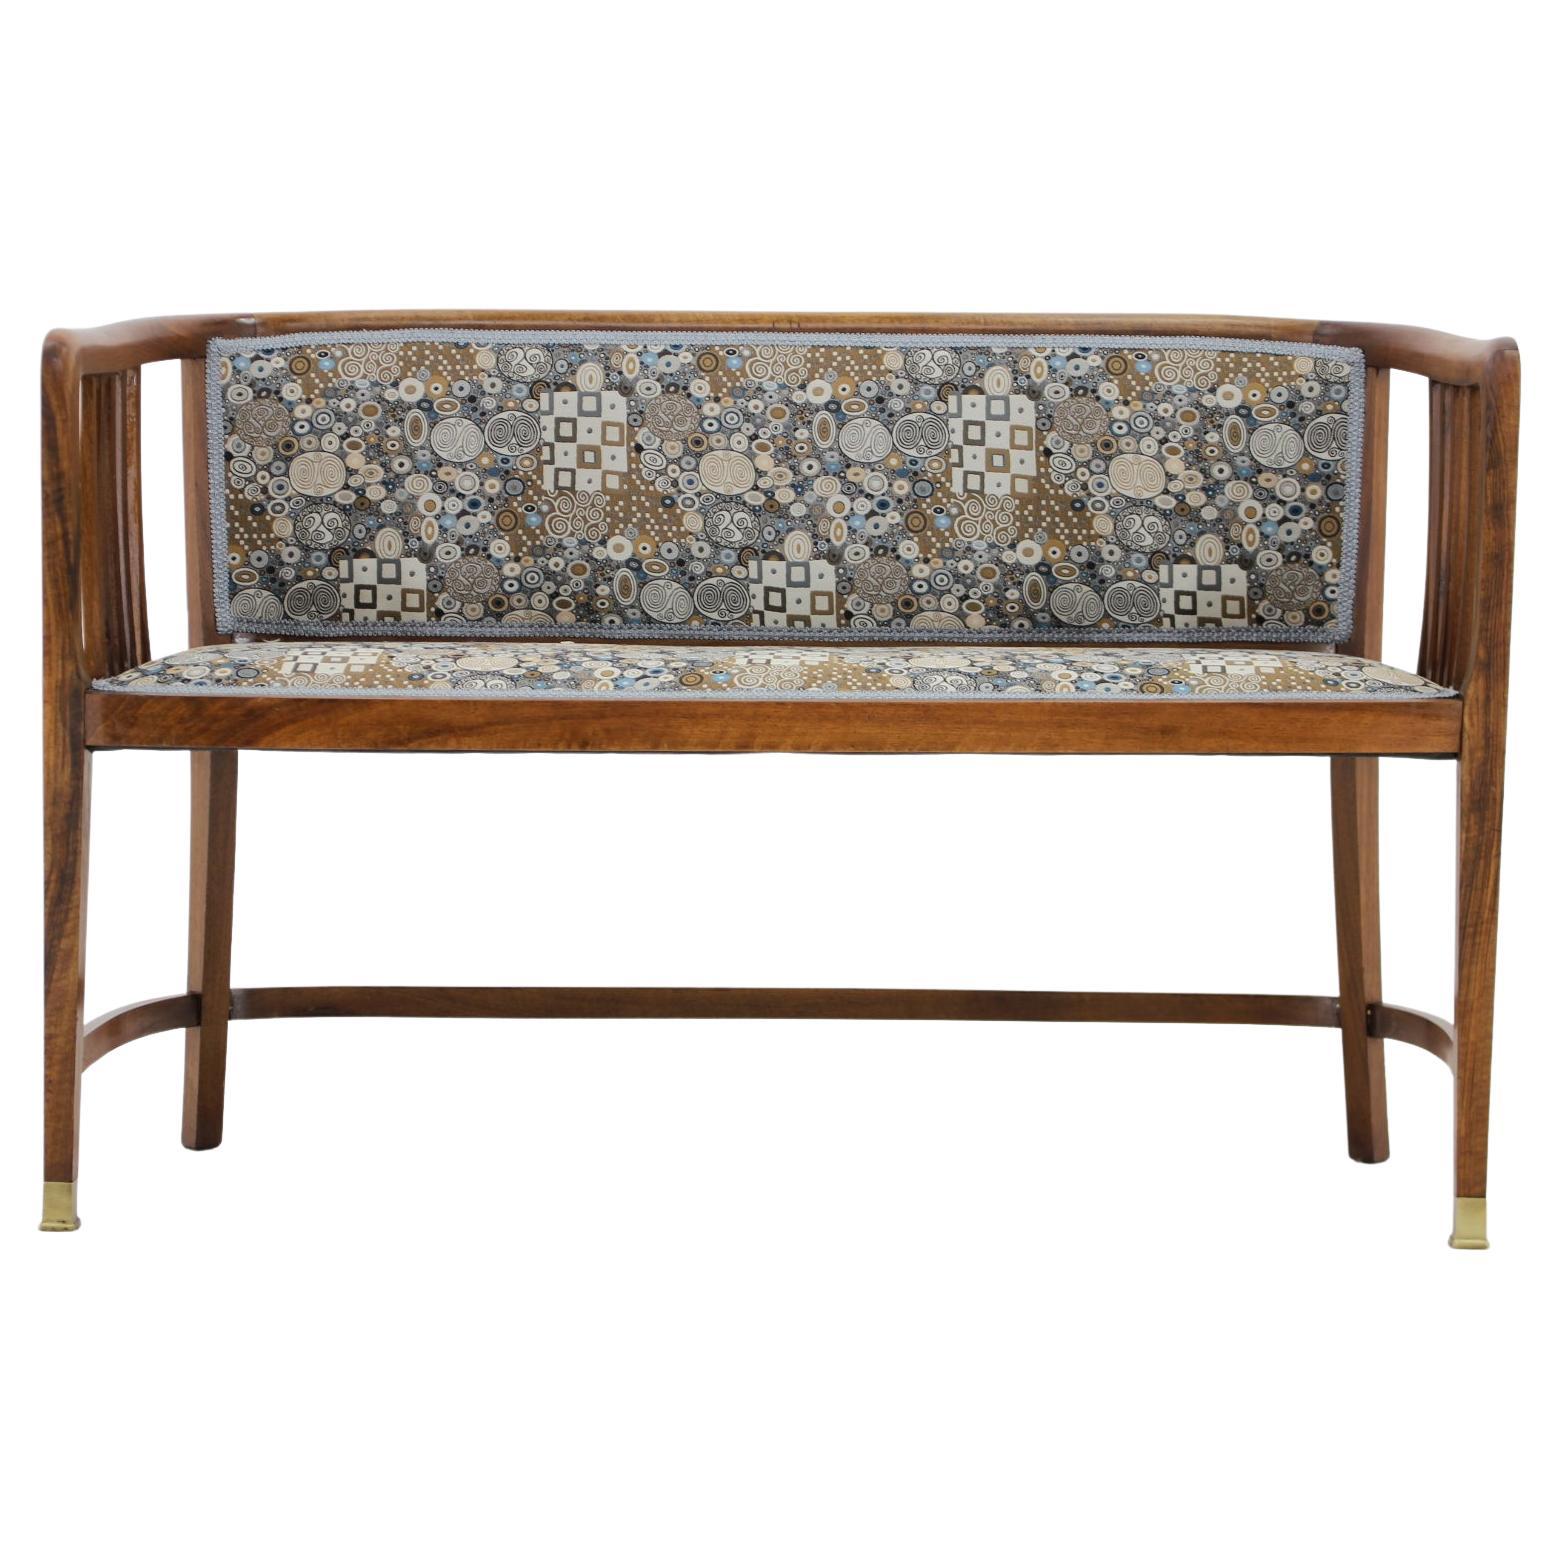 1900s Viennese Secession Sofa in the Style of Josef Maria Olbrich For Sale